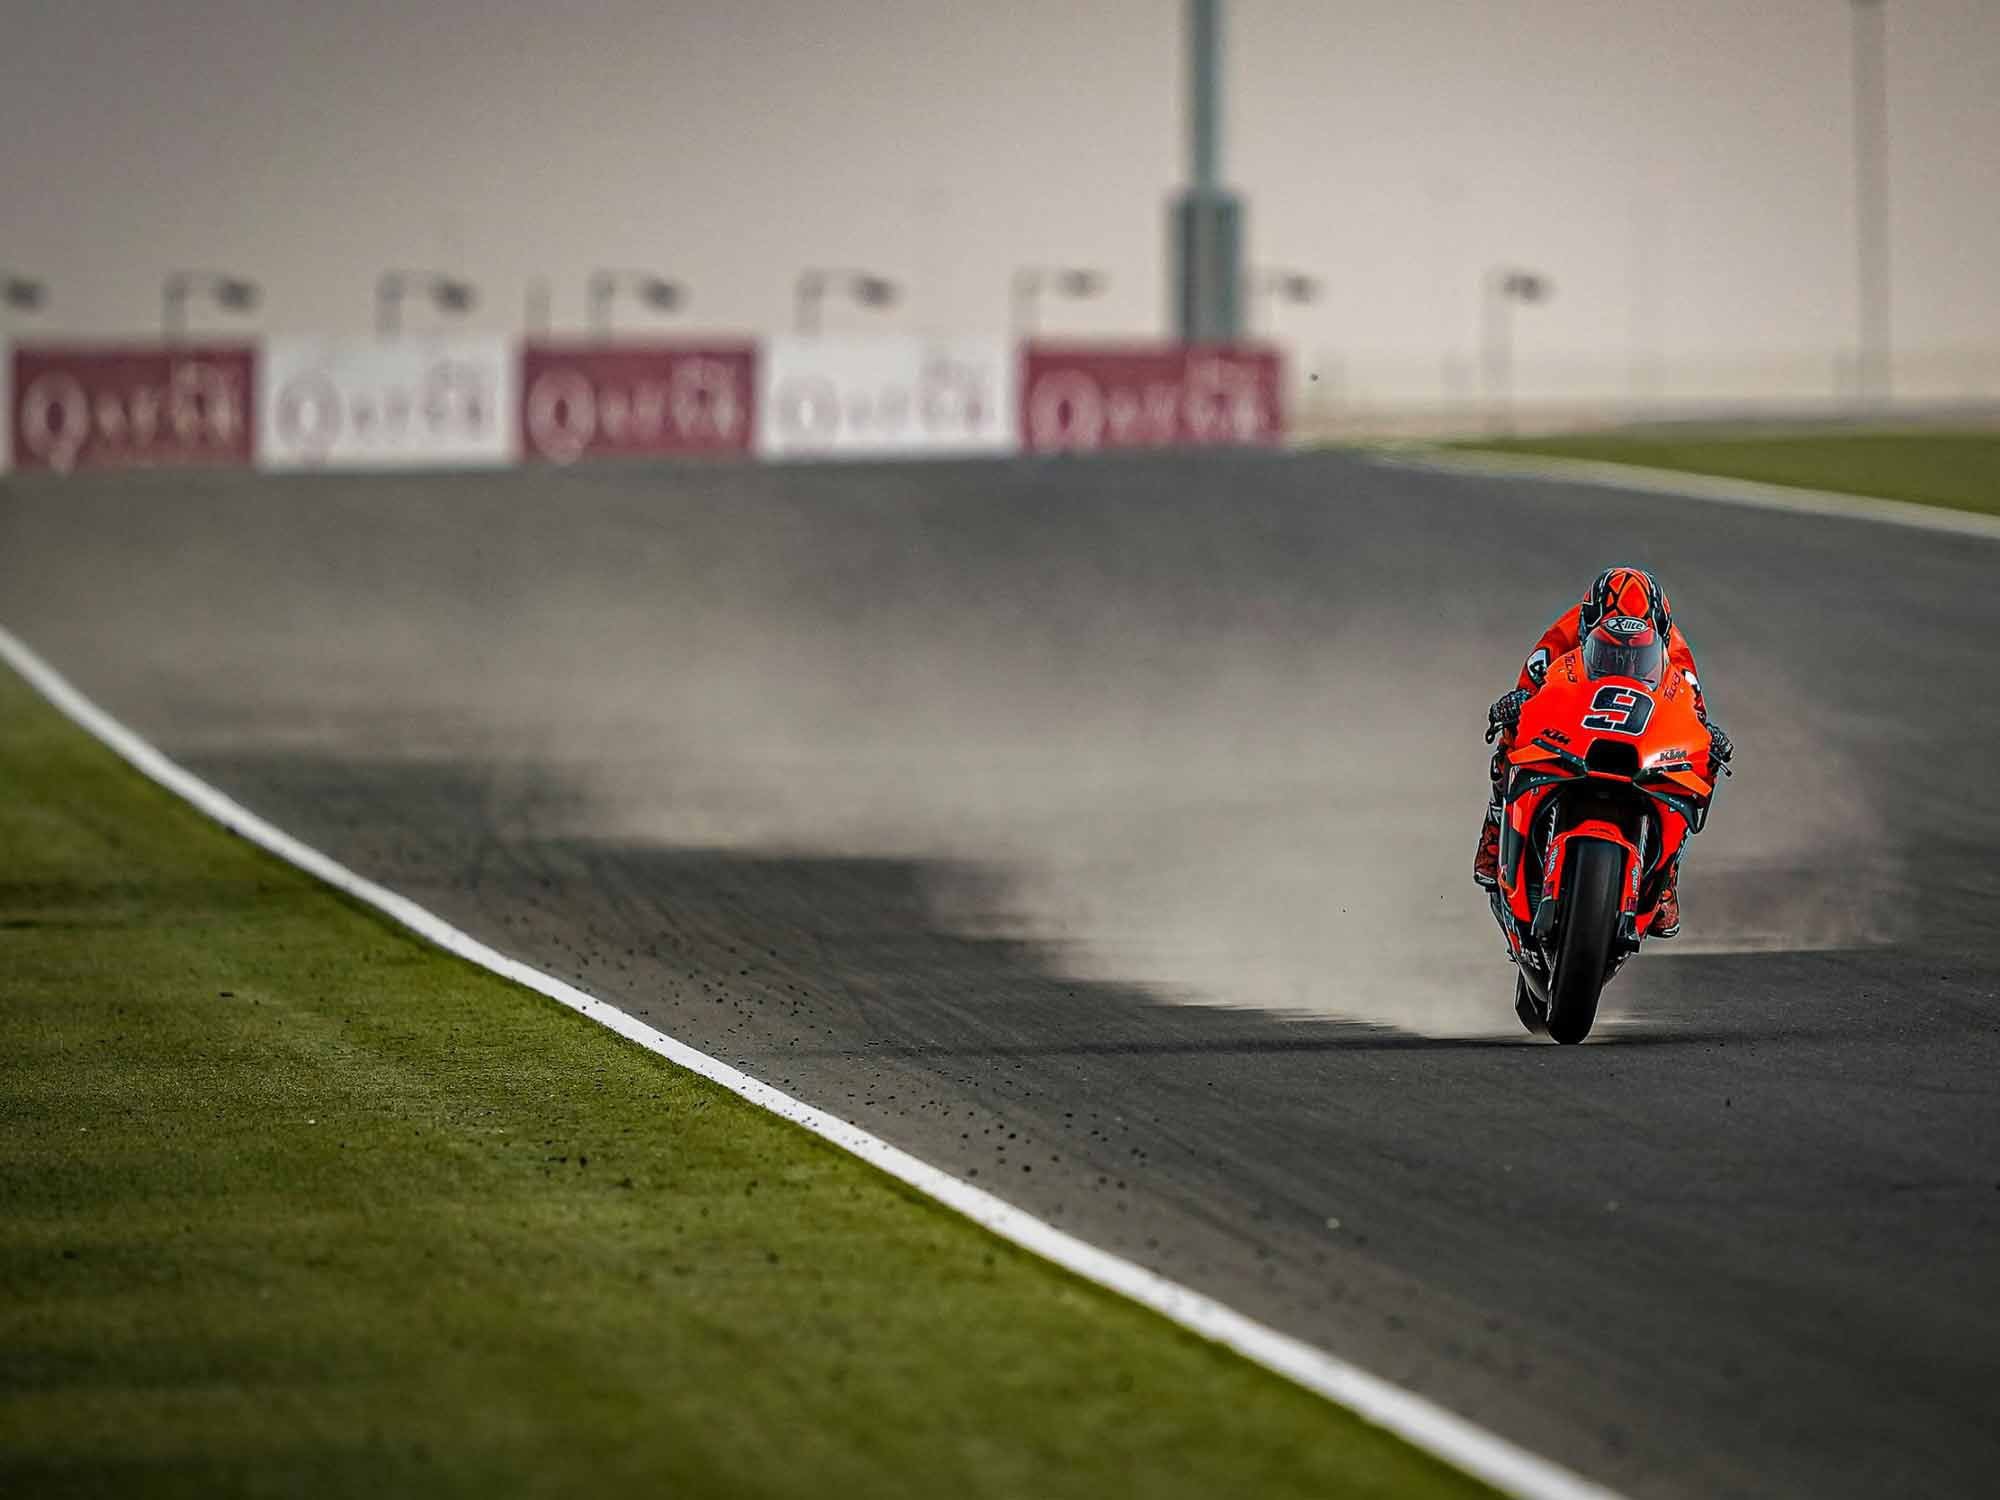 Sand deposited on Losail’s asphalt shows the turbulence left in the wake of a modern MotoGP racebike.